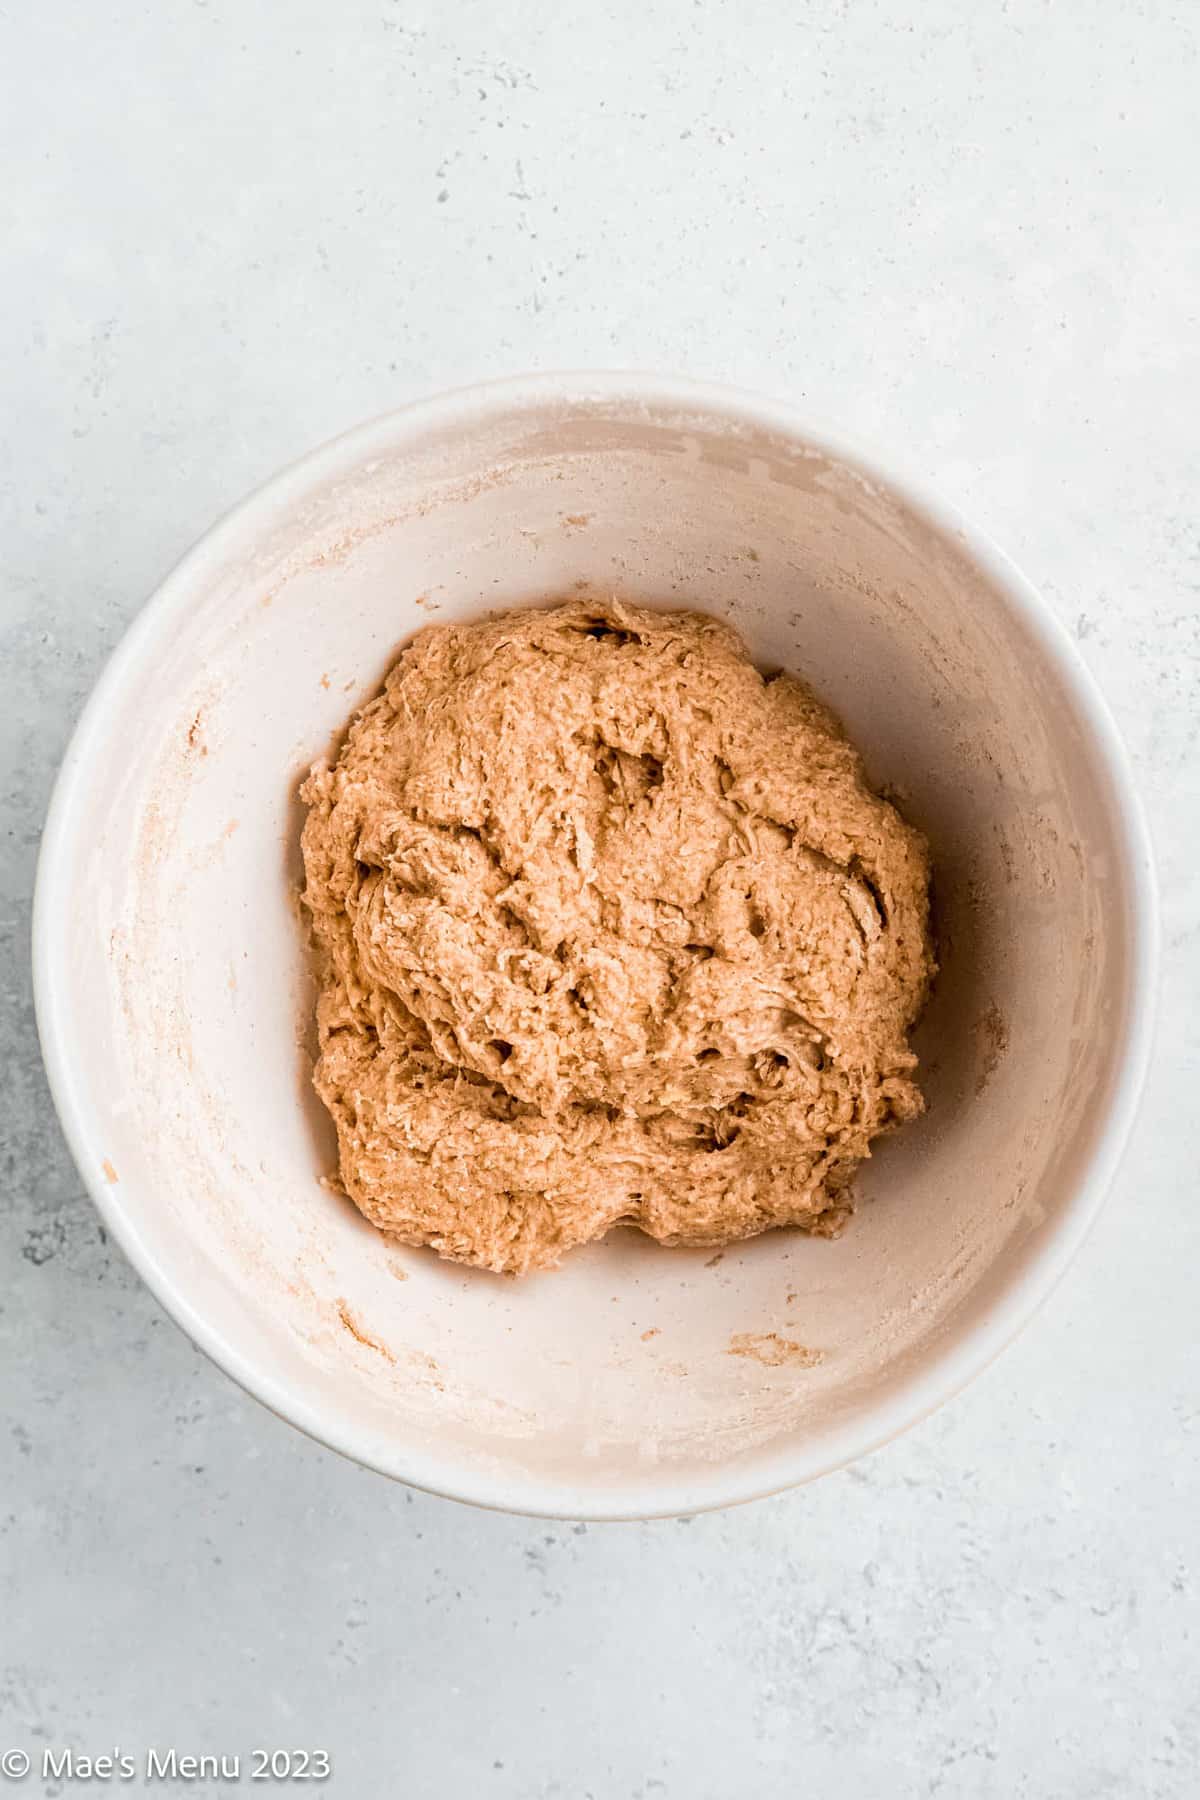 A bowl of walnut bread dough before kneading.